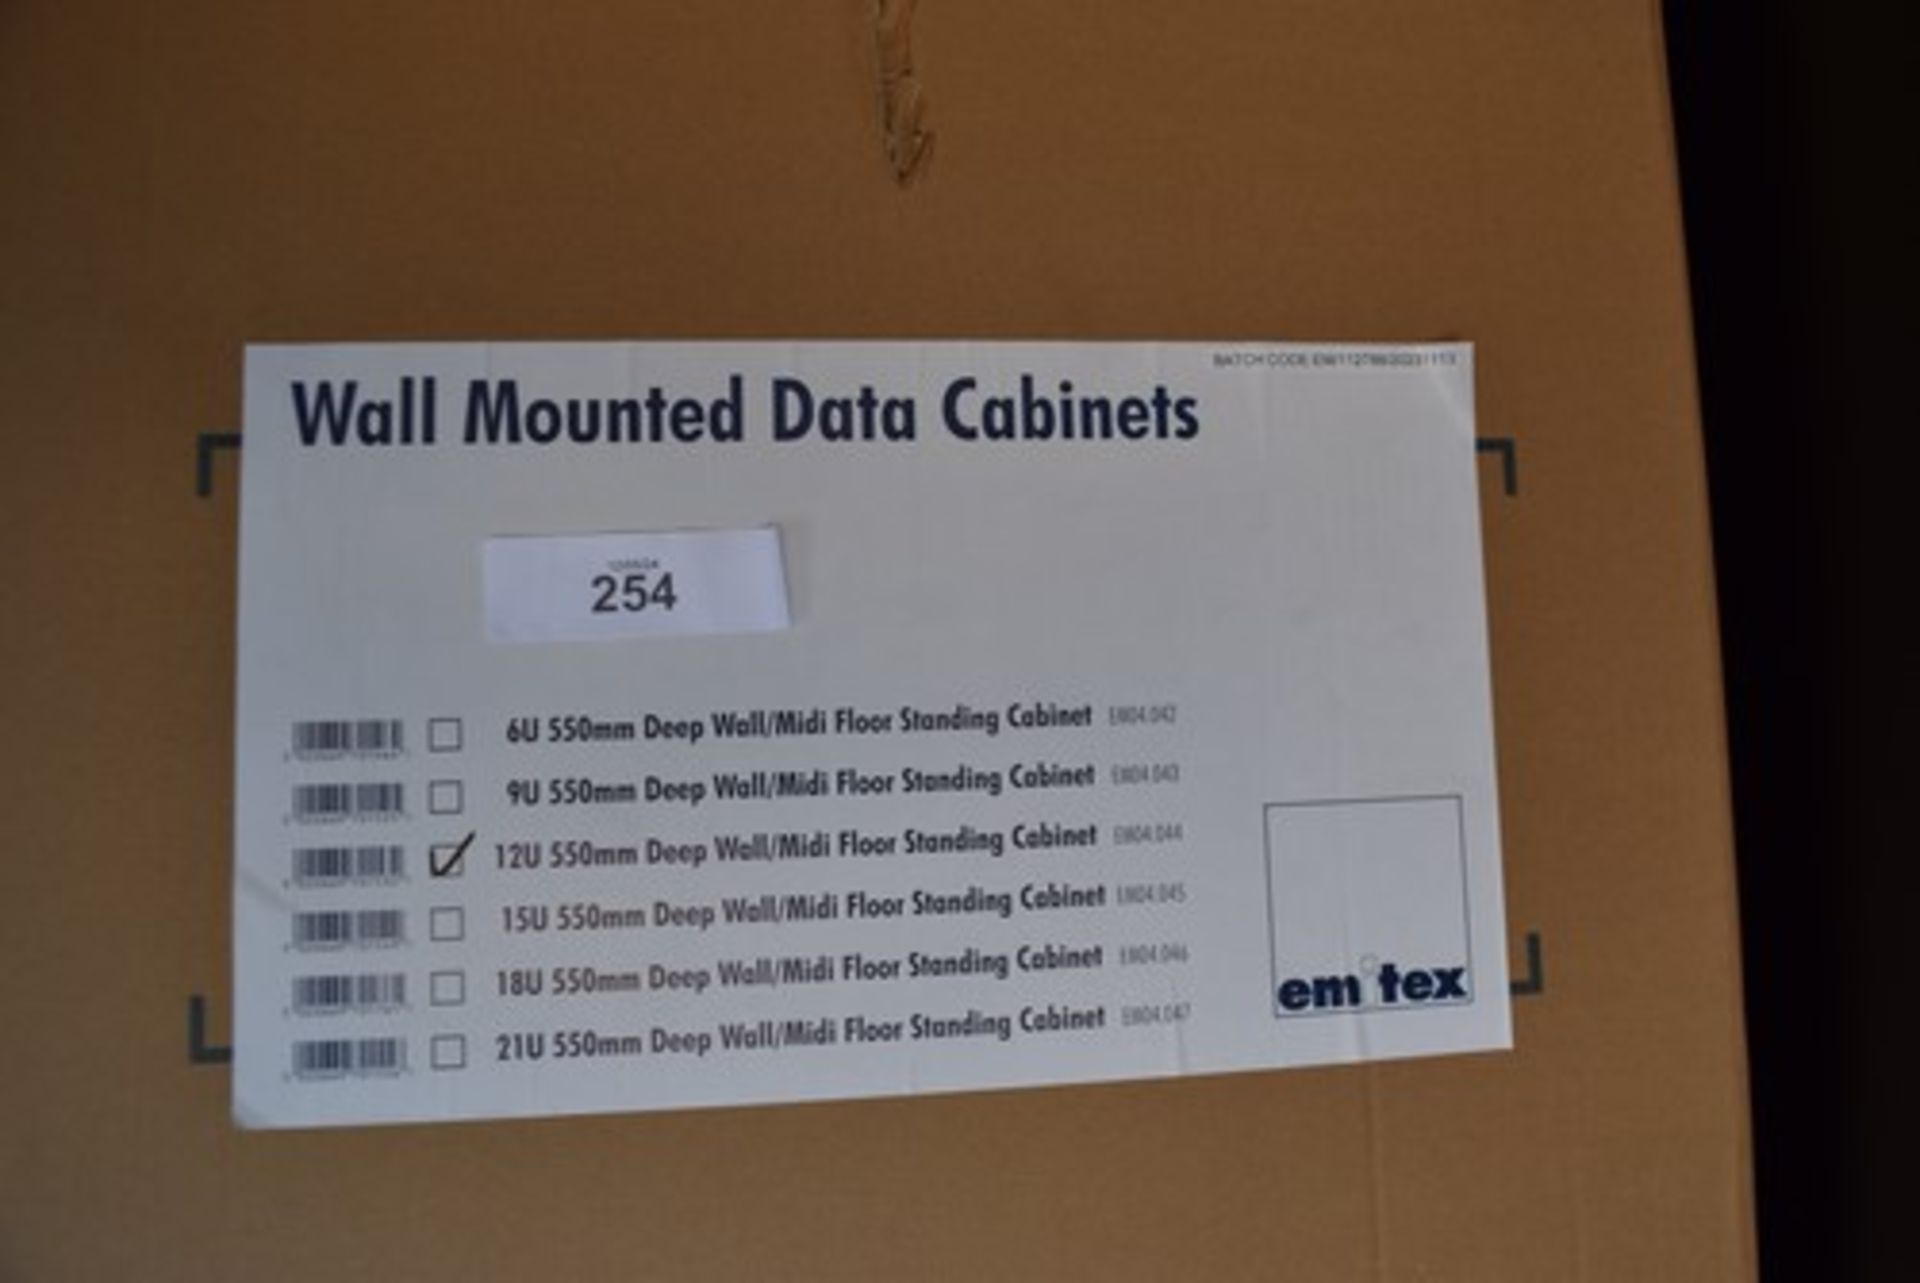 1 x Emitex wall mounted data cabinet, part No: EM04.044 - new in box (TS)